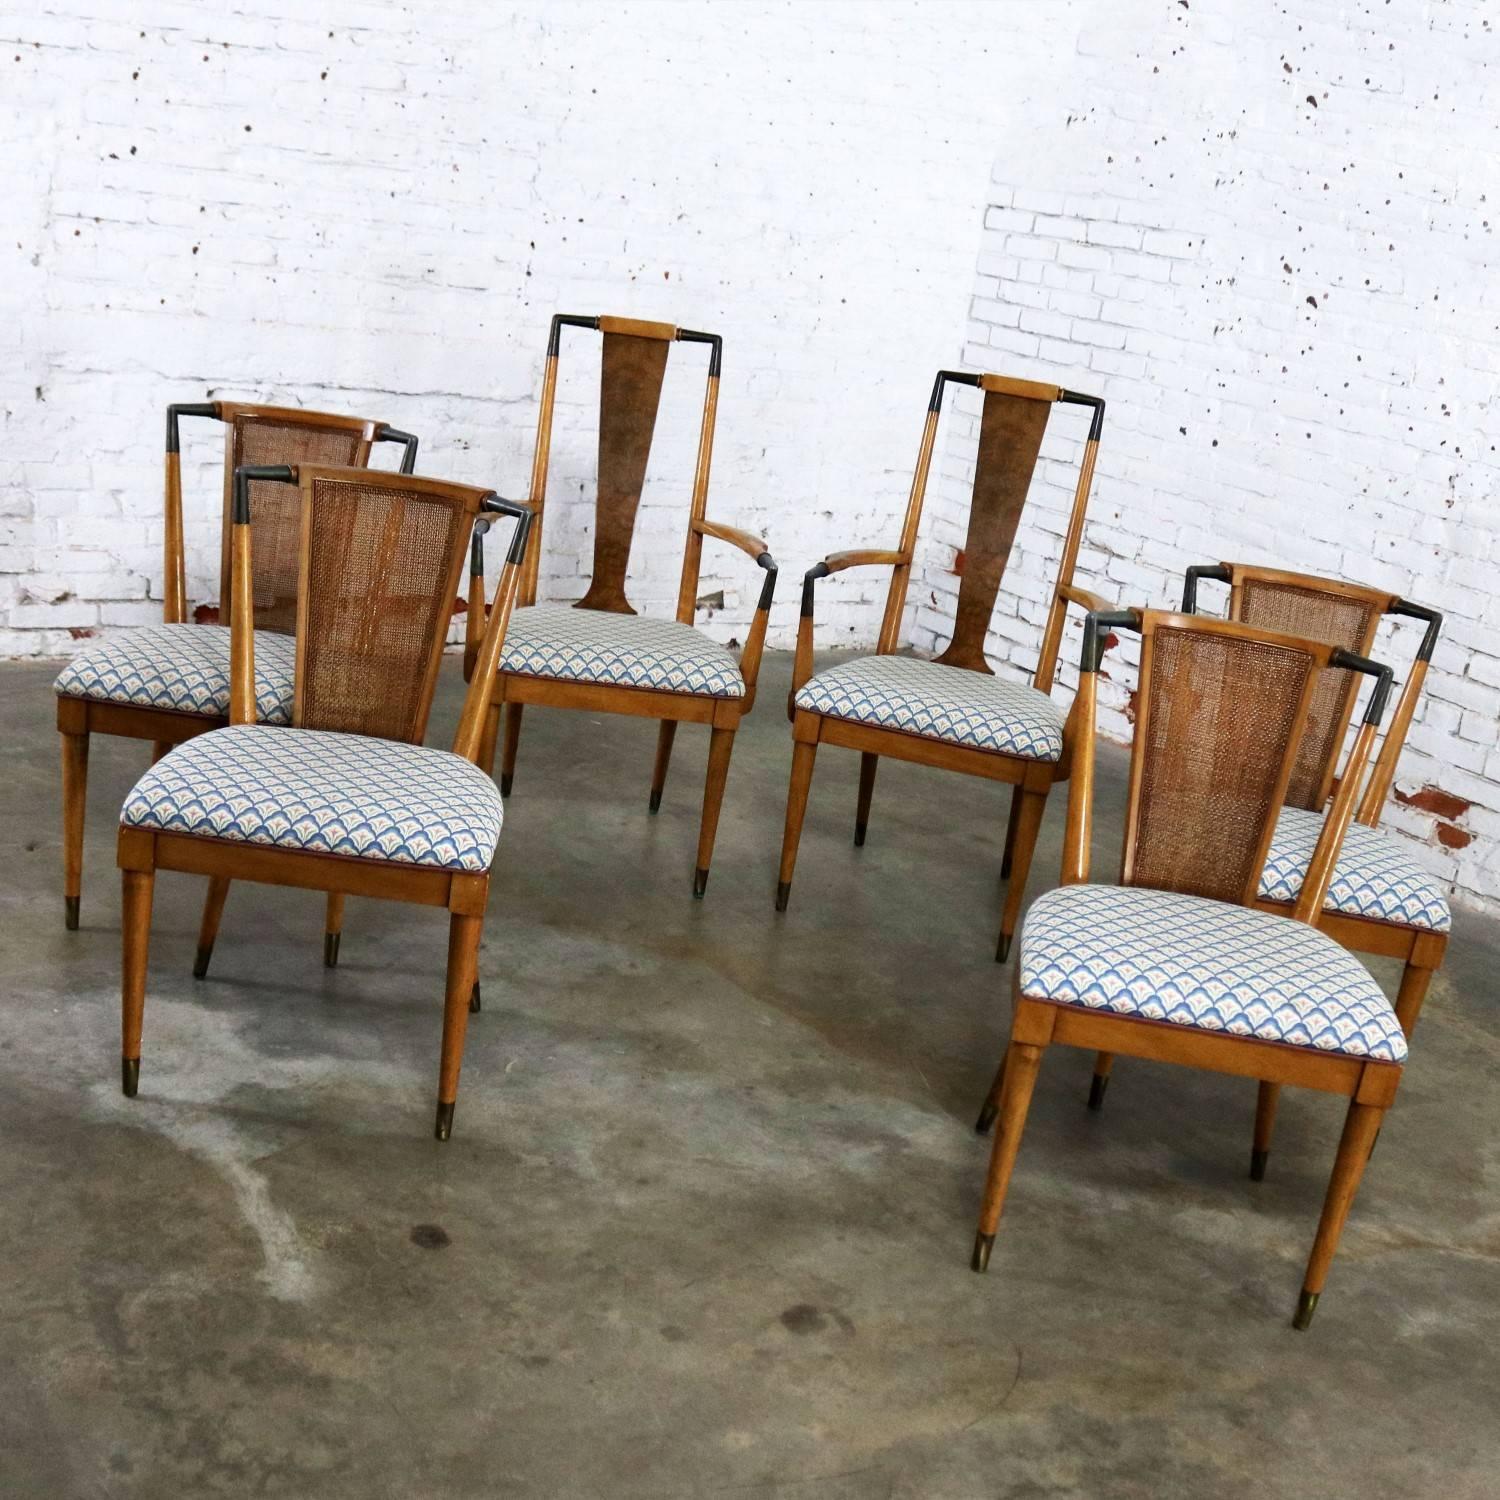 Handsome set of six mid-century modern dining chairs attributed to William Clingman for J. L. Metz Furniture’s Contempora Collection. Featuring metal accents and cane backs. The set consists of two arm chairs and four side chairs. They are in